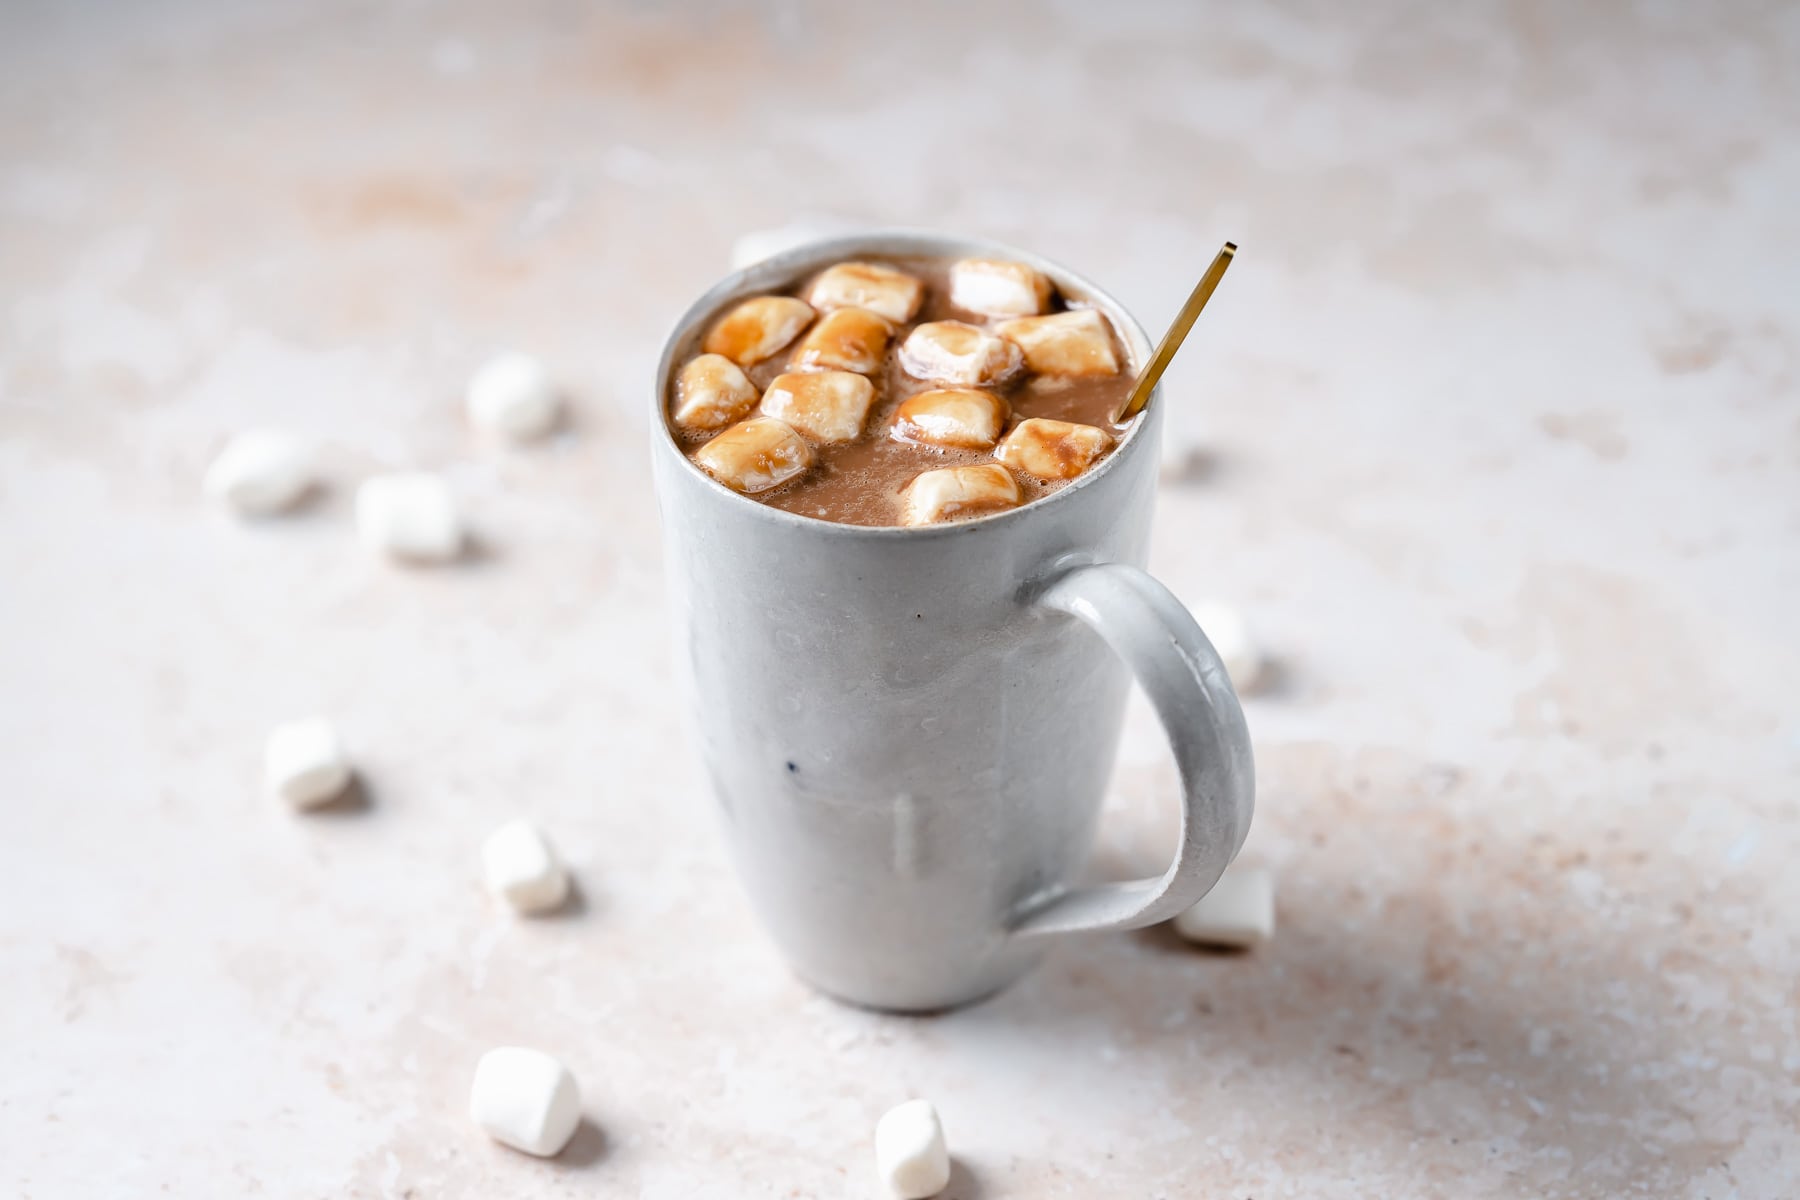 A golden spoon stick out of a white ceramic mug filled with hot chocolate.